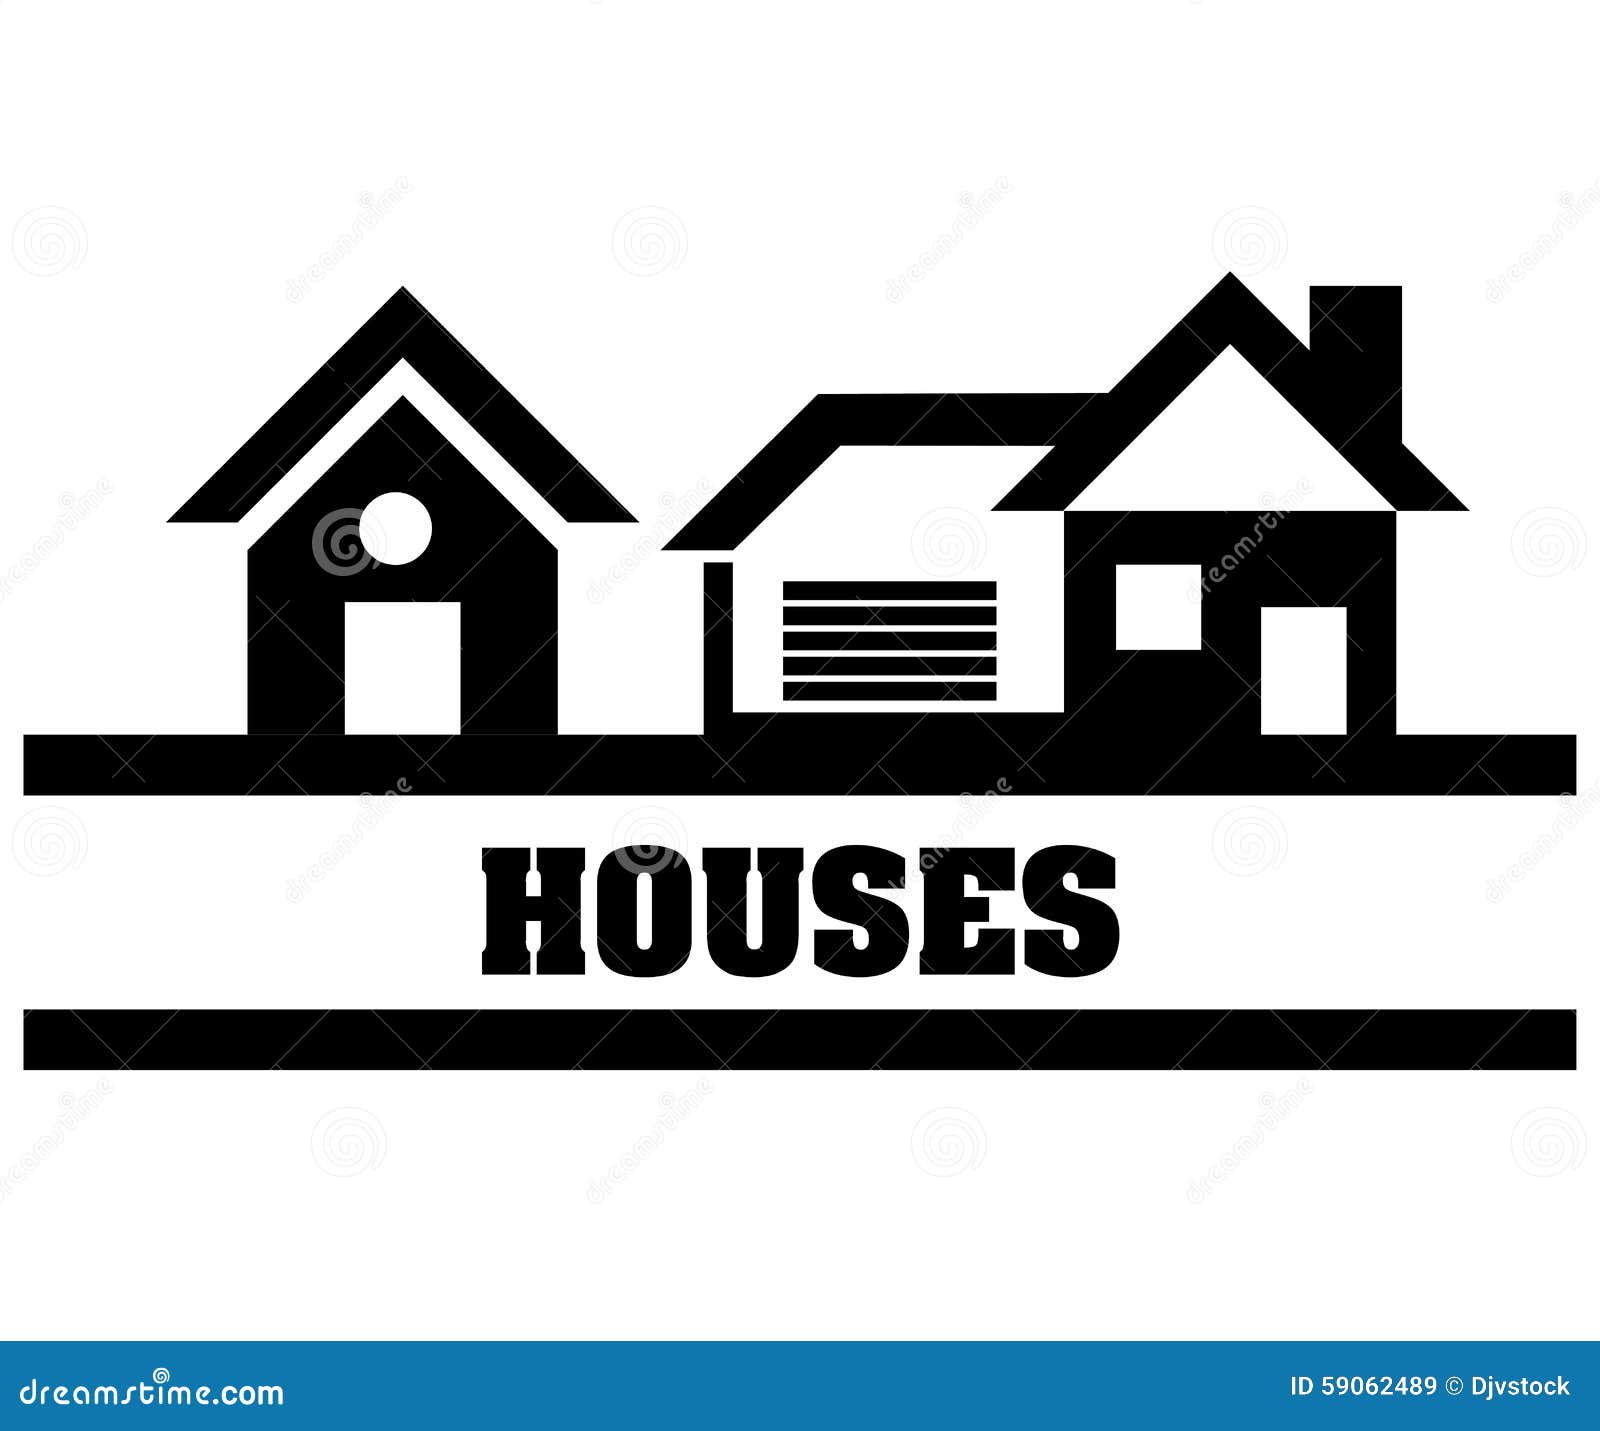 House design stock vector. Illustration of housing, structure - 59062489